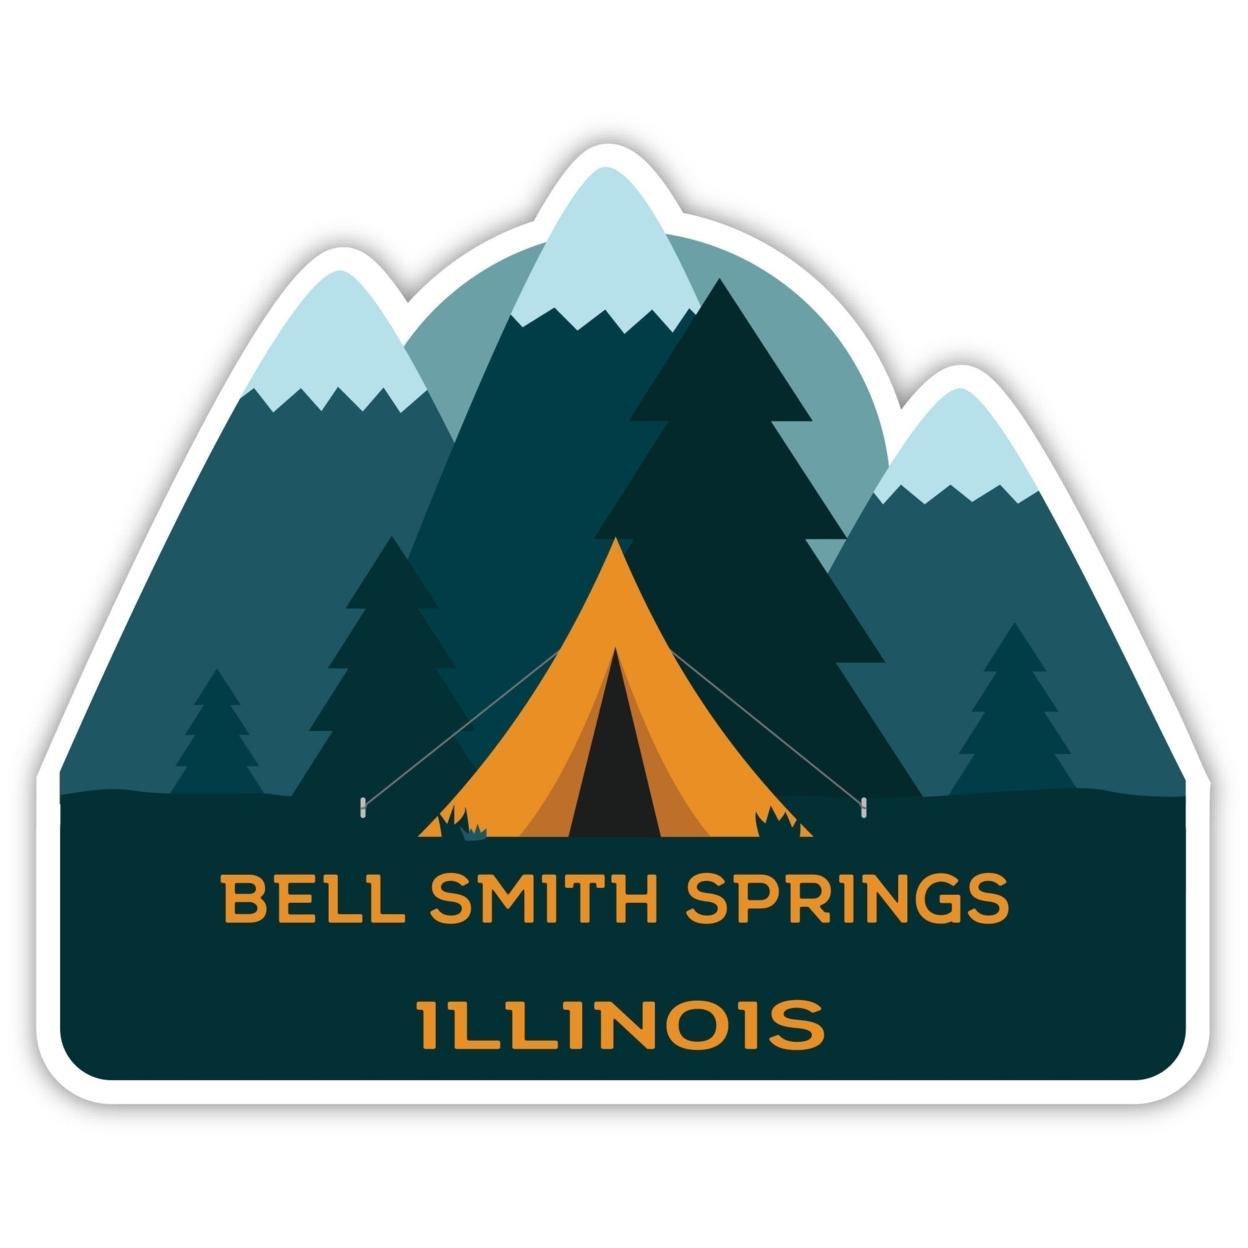 Bell Smith Springs Illinois Souvenir Decorative Stickers (Choose Theme And Size) - Single Unit, 12-Inch, Tent